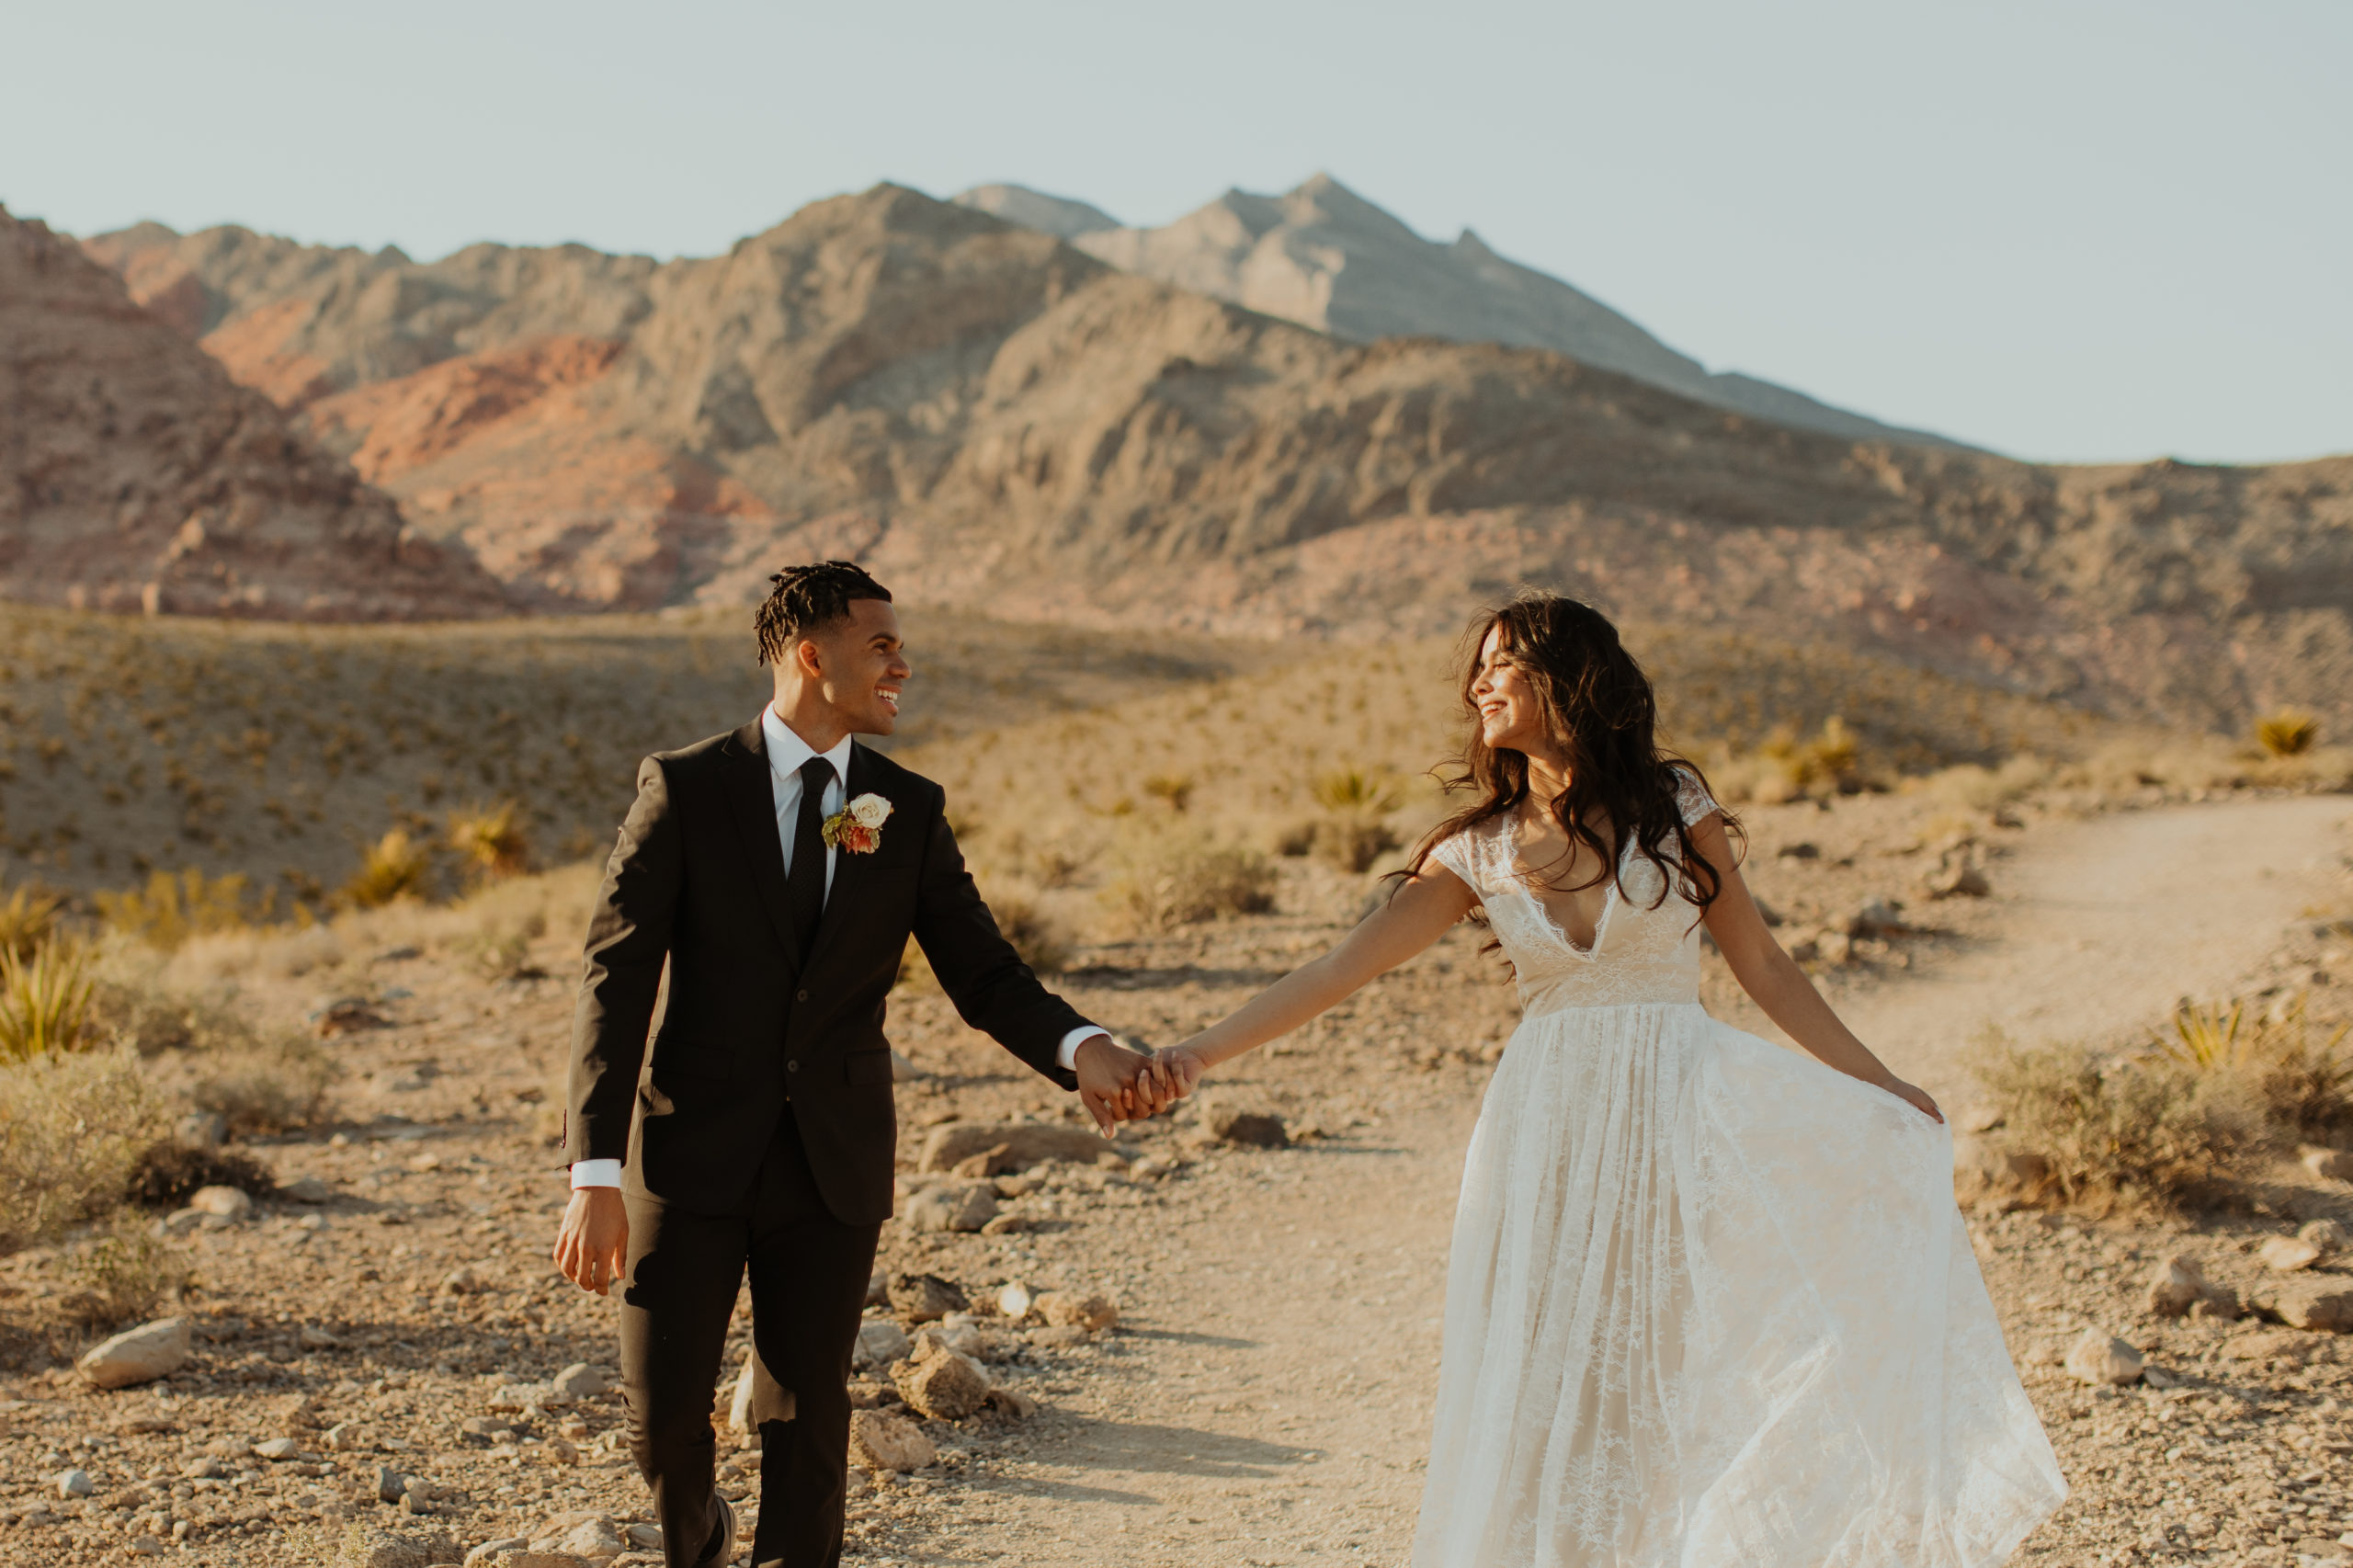 bride and groom walking through the desert holding hands